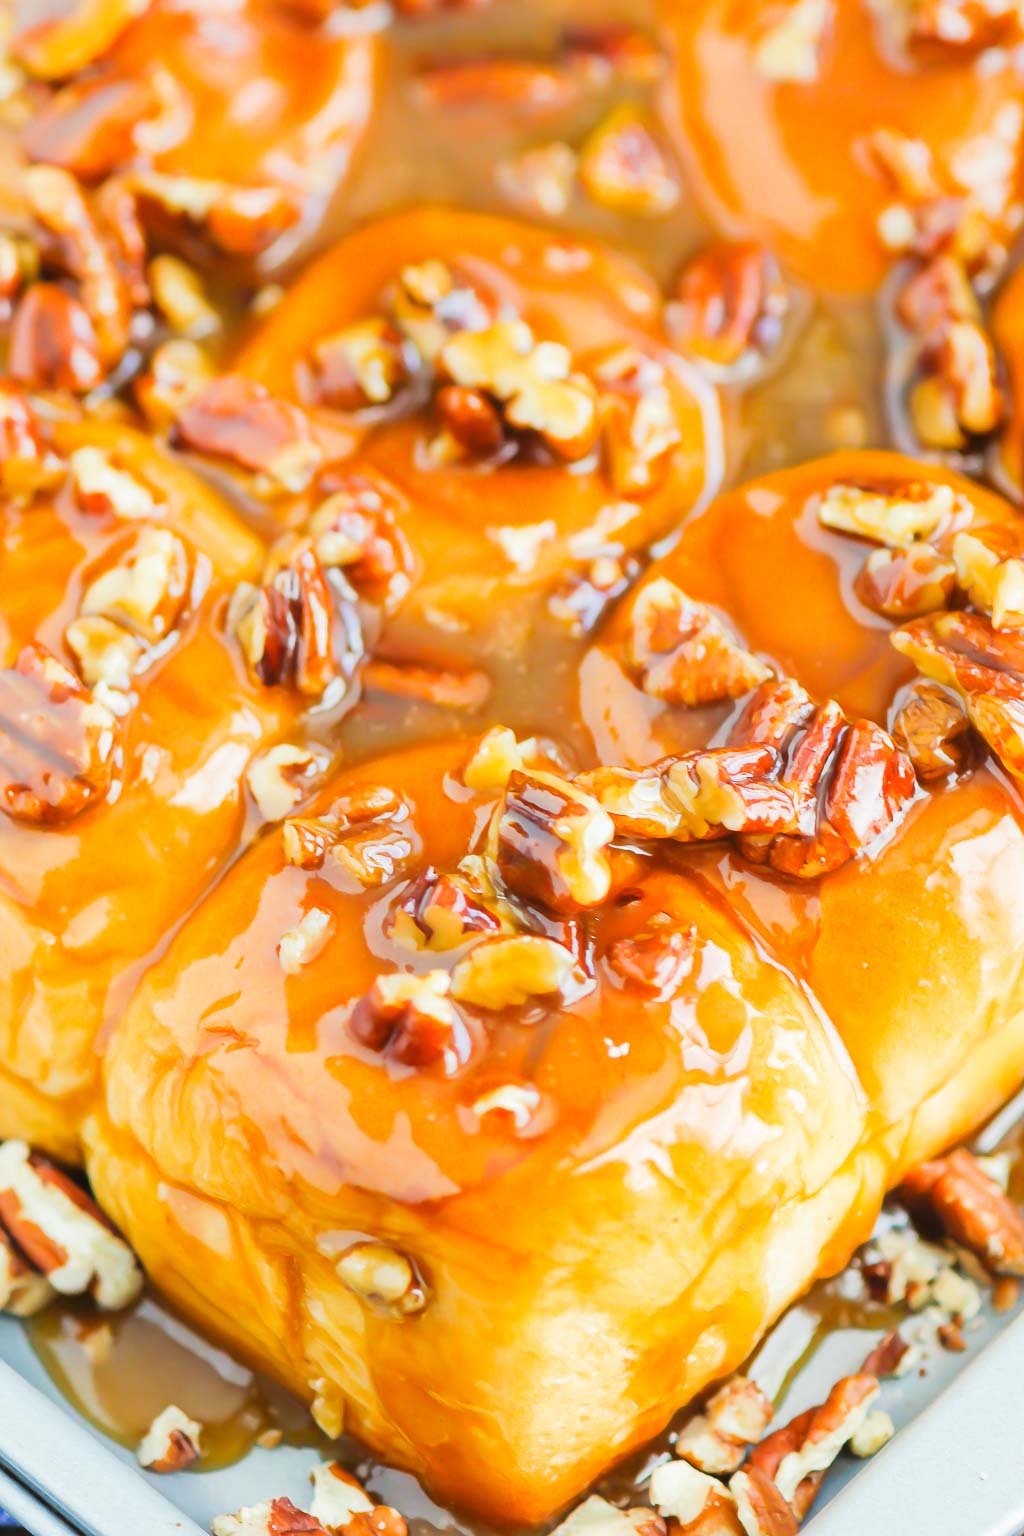 Caramel Sticky Buns are soft, sweet, and ready in just 30 minutes. Sweet rolls are topped with a rich caramel sauce, chopped pecans, and then baked until golden. Perfect for breakfast or dessert! #stickybuns #sweetrolls #caramelstickybuns #caramelrolls #breakfast #dessert